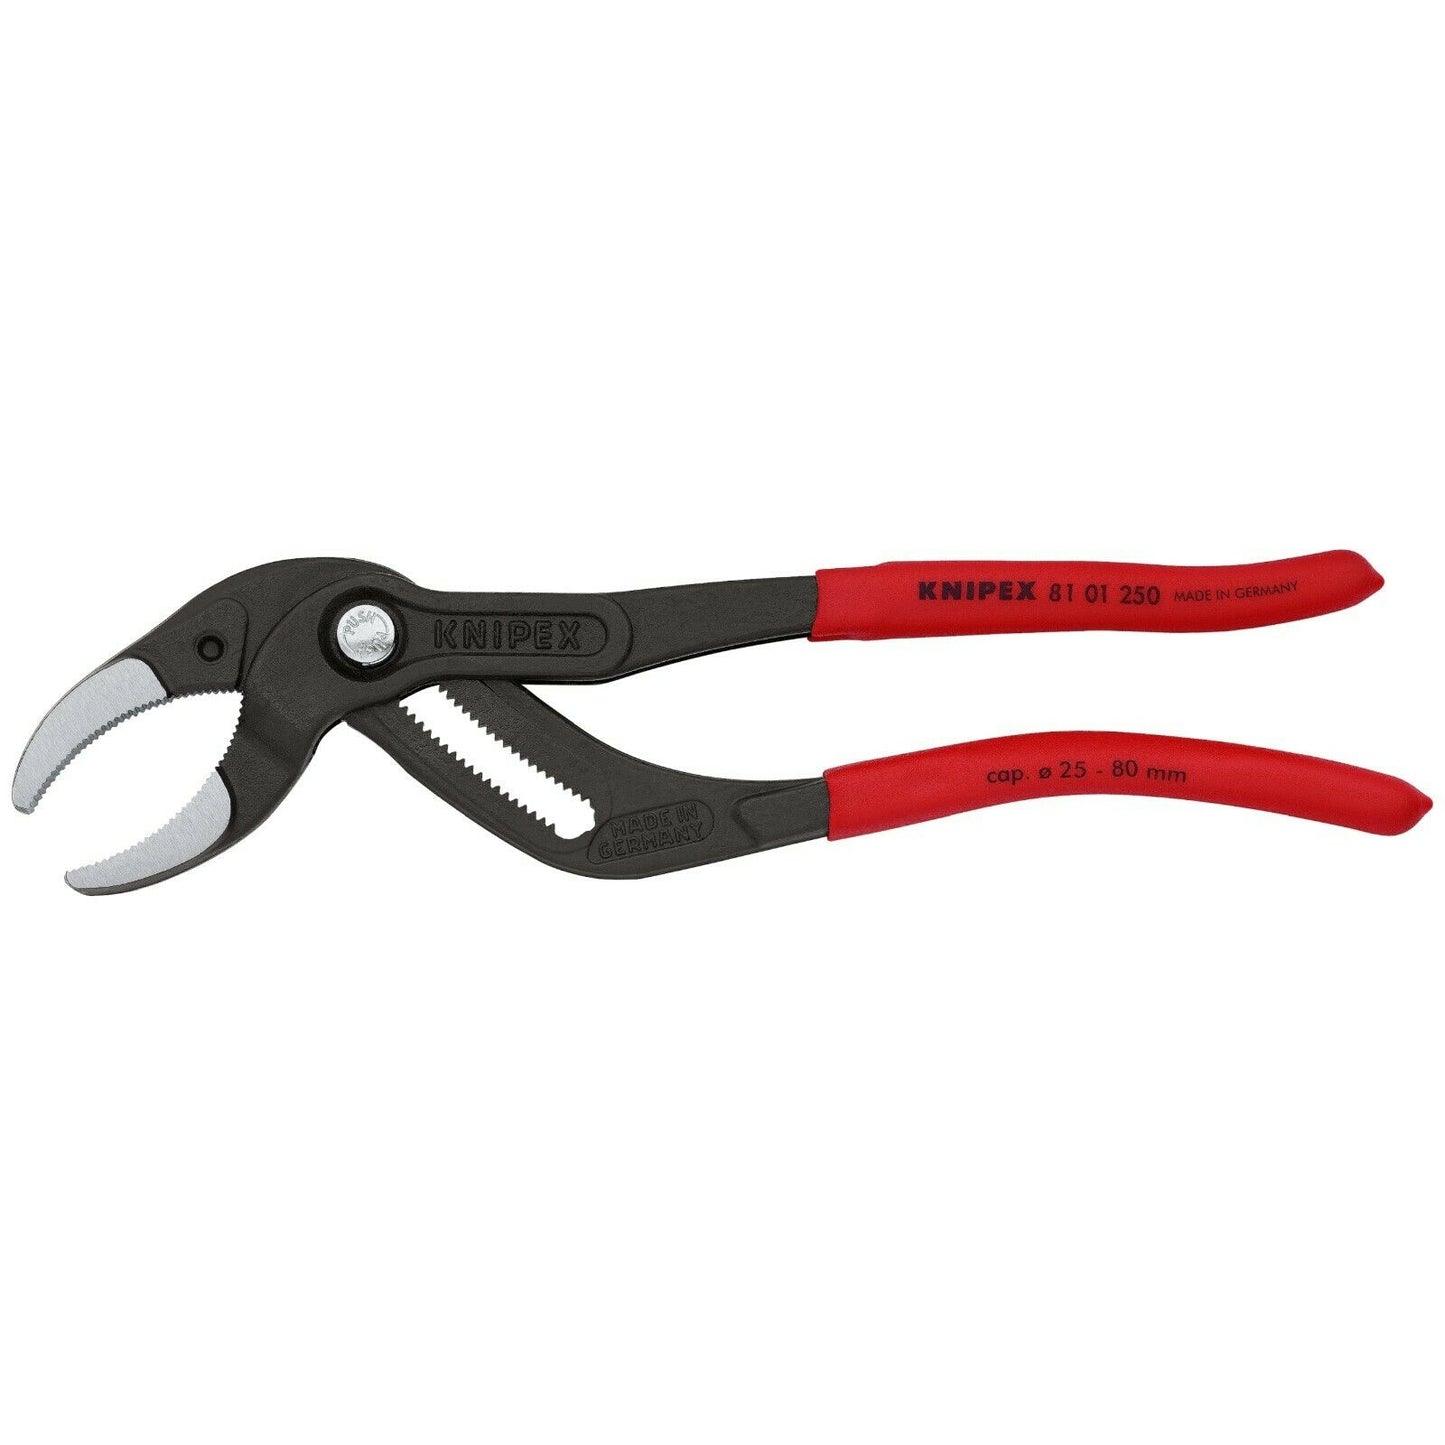 knipex pipe and connector pliers 10" 81 01 250